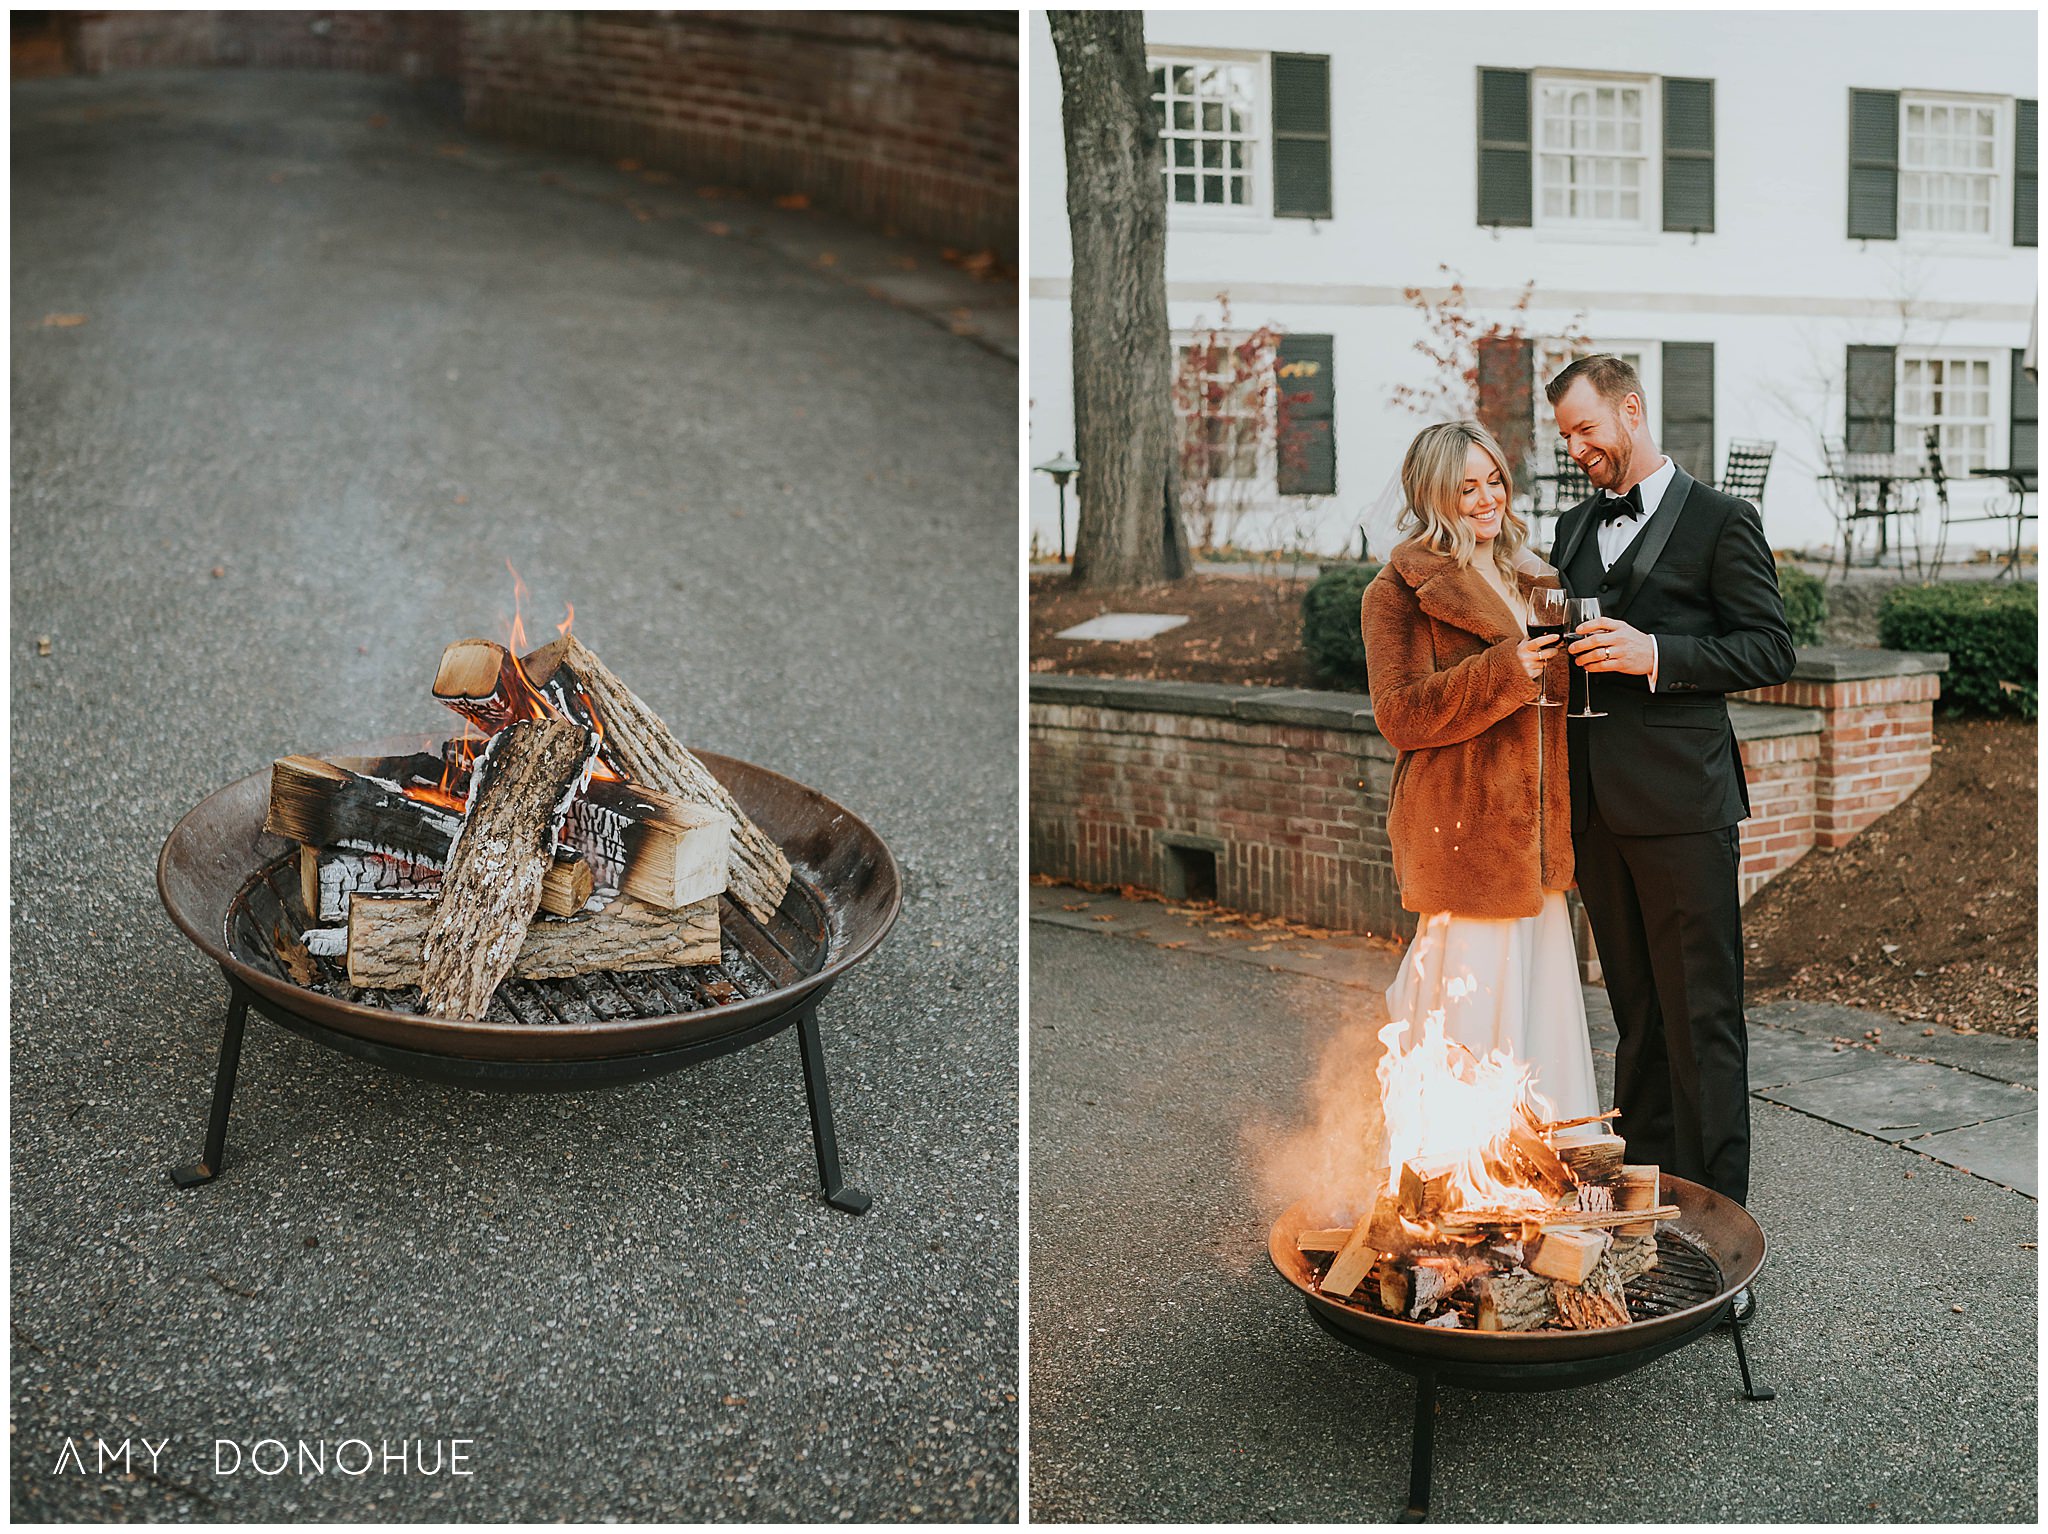 Romantic by the fire wedding portraits | Vermont Intimate Wedding Photographer | Woodstock Inn & Resort Vermont | © Amy Donohue Photography